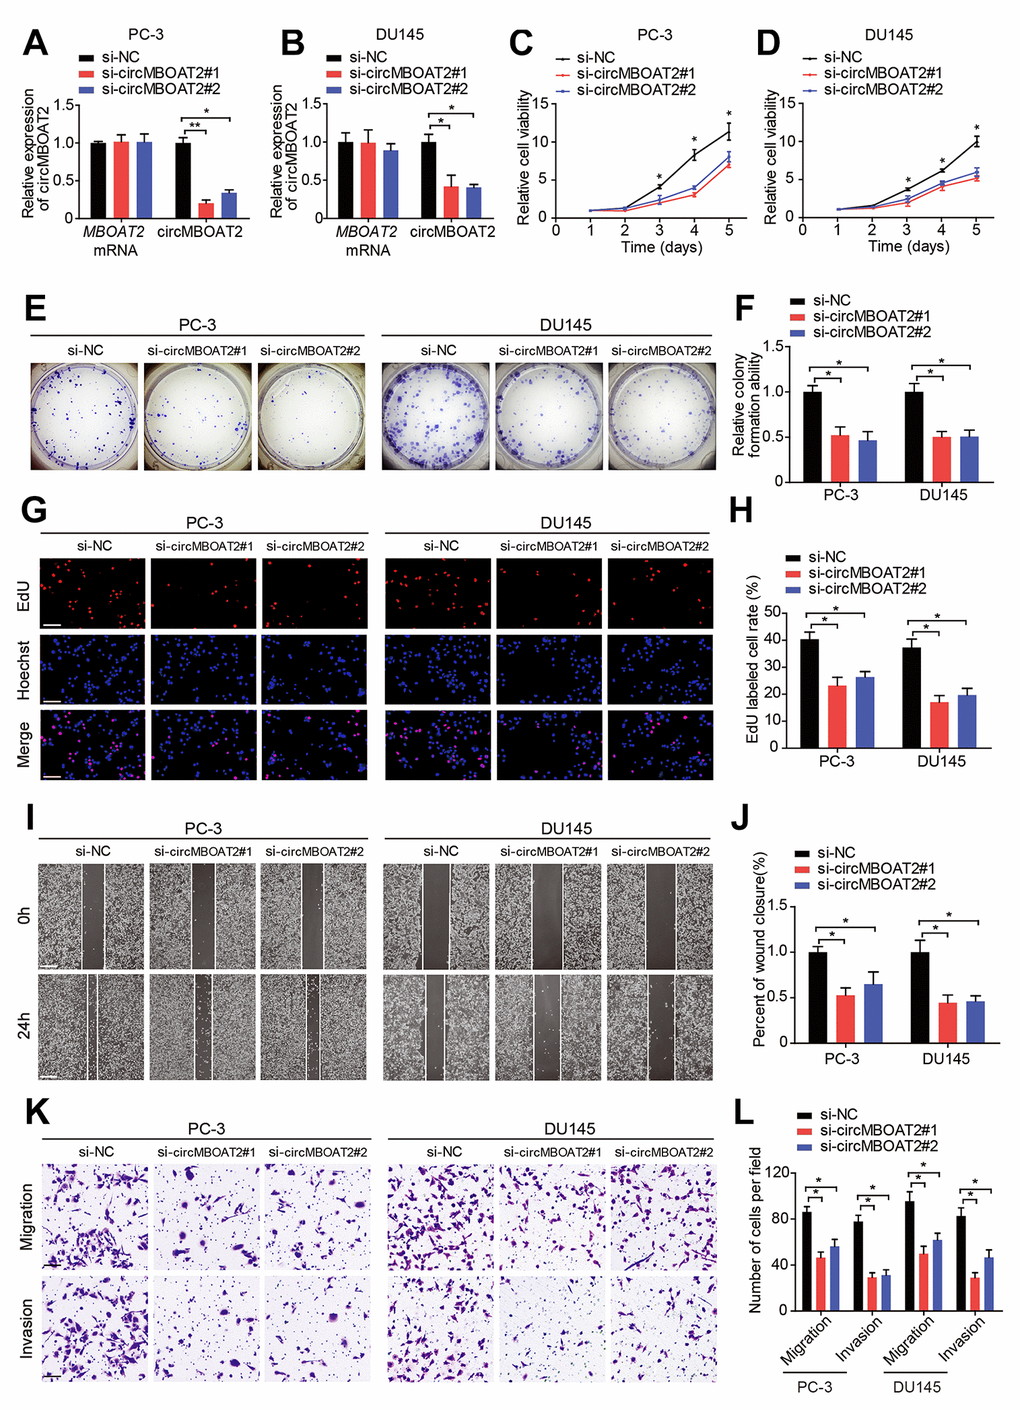 circMBOAT2 promotes cell proliferation, migration, and invasion in vitro. (A, B) qRT-PCR analysis of circMBOAT2 and MBOAT2 expression in PC-3 and DU145 cells treated with circMBOAT2 siRNAs. (C, D) CCK-8 assay determined the cell viability in PC-3 and DU145 cells treated with circMBOAT2 siRNAs. (E, F) Representative images and quantifications of colony formation assays in PC-3 and DU145 cells treated with circMBOAT2 siRNAs. (G, H) Representative images and quantifications of EdU assays in PC-3 and DU145 cells treated with circMBOAT2 siRNAs. Scale bars: 100 μm. (I, J) Representative images and quantifications of wound healing assays in PC-3 and DU145 cells treated with circMBOAT2 siRNAs. Scale bars: 200 μm. (K, L) Representative images and quantification of transwell assays in PC-3 and DU145 cells treated with circMBOAT2 siRNAs. Scale bars: 100 μm. Data are displayed as mean ± SD. *p p 